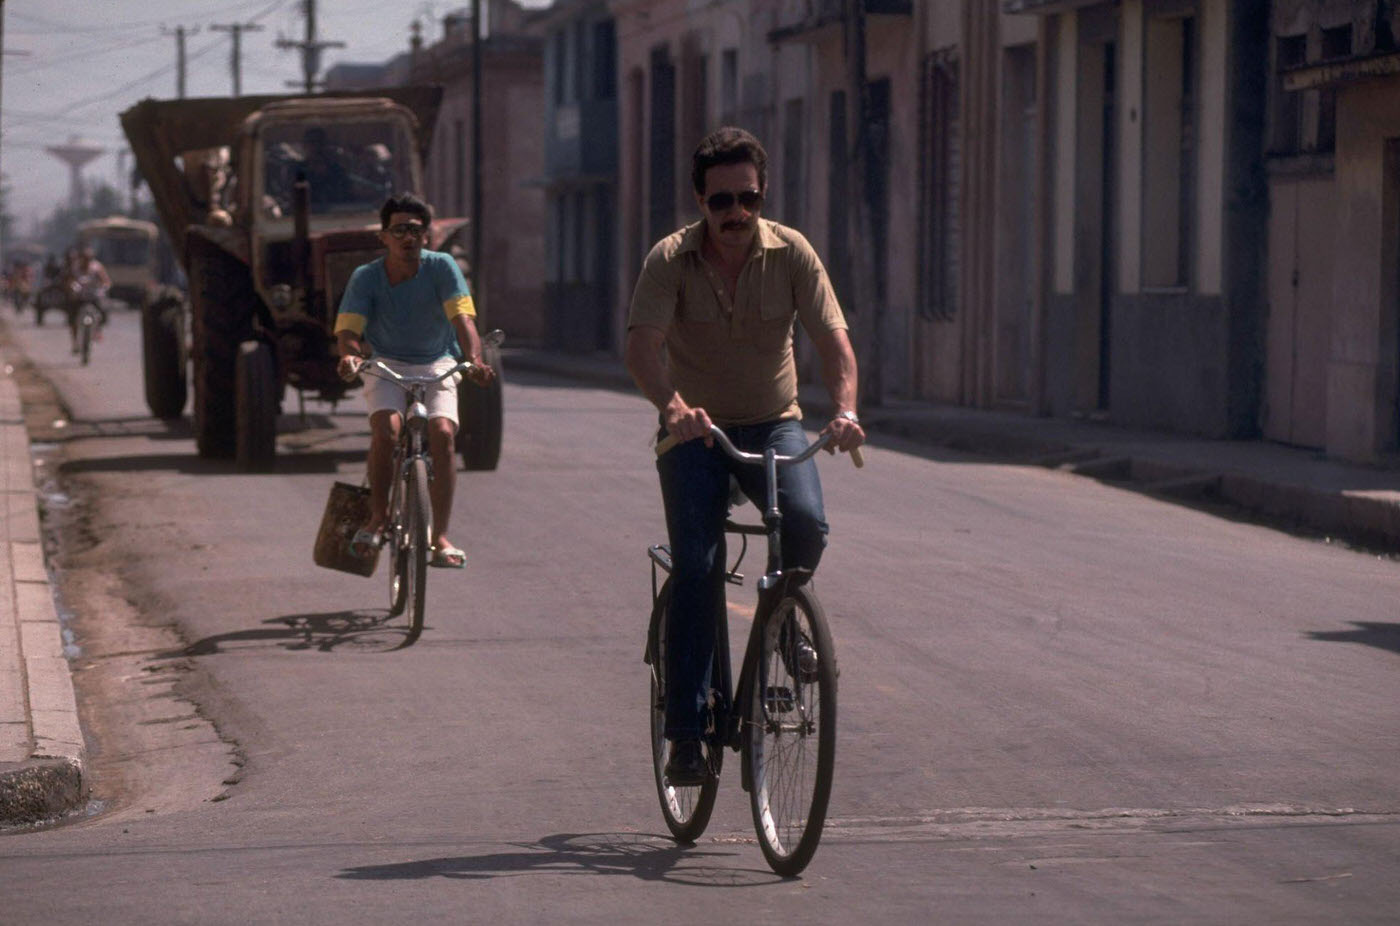 Bicyclists traversing the street, manifesting an increase in bike riding to conserve gasoline in Havana, Cuba.